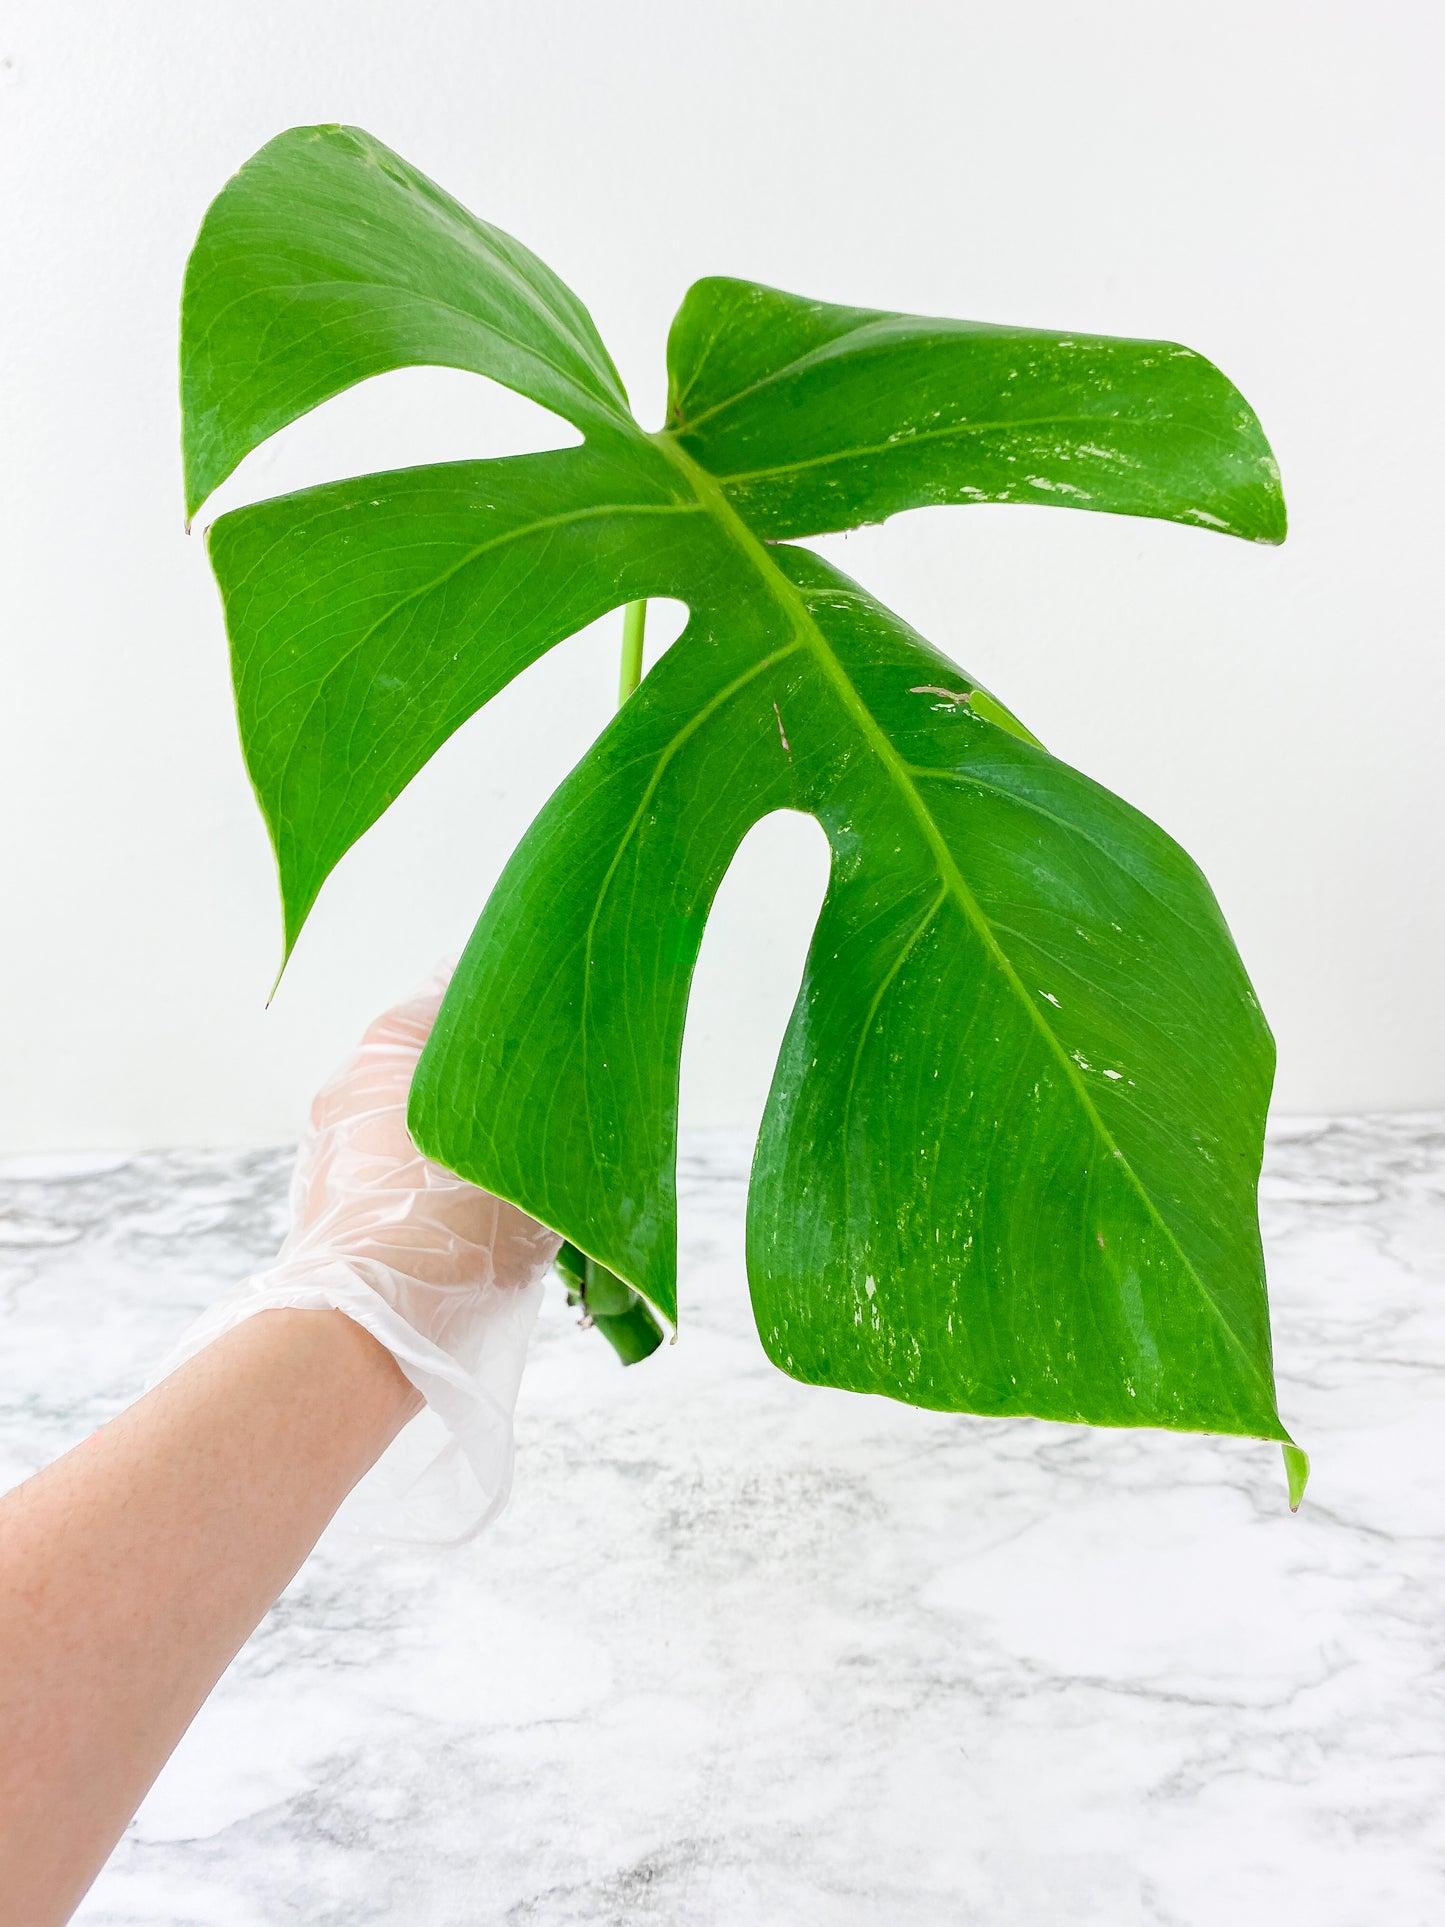 Monstera Albo Borsigiana 1 leaf rooting cutting from a highly variegated specimen